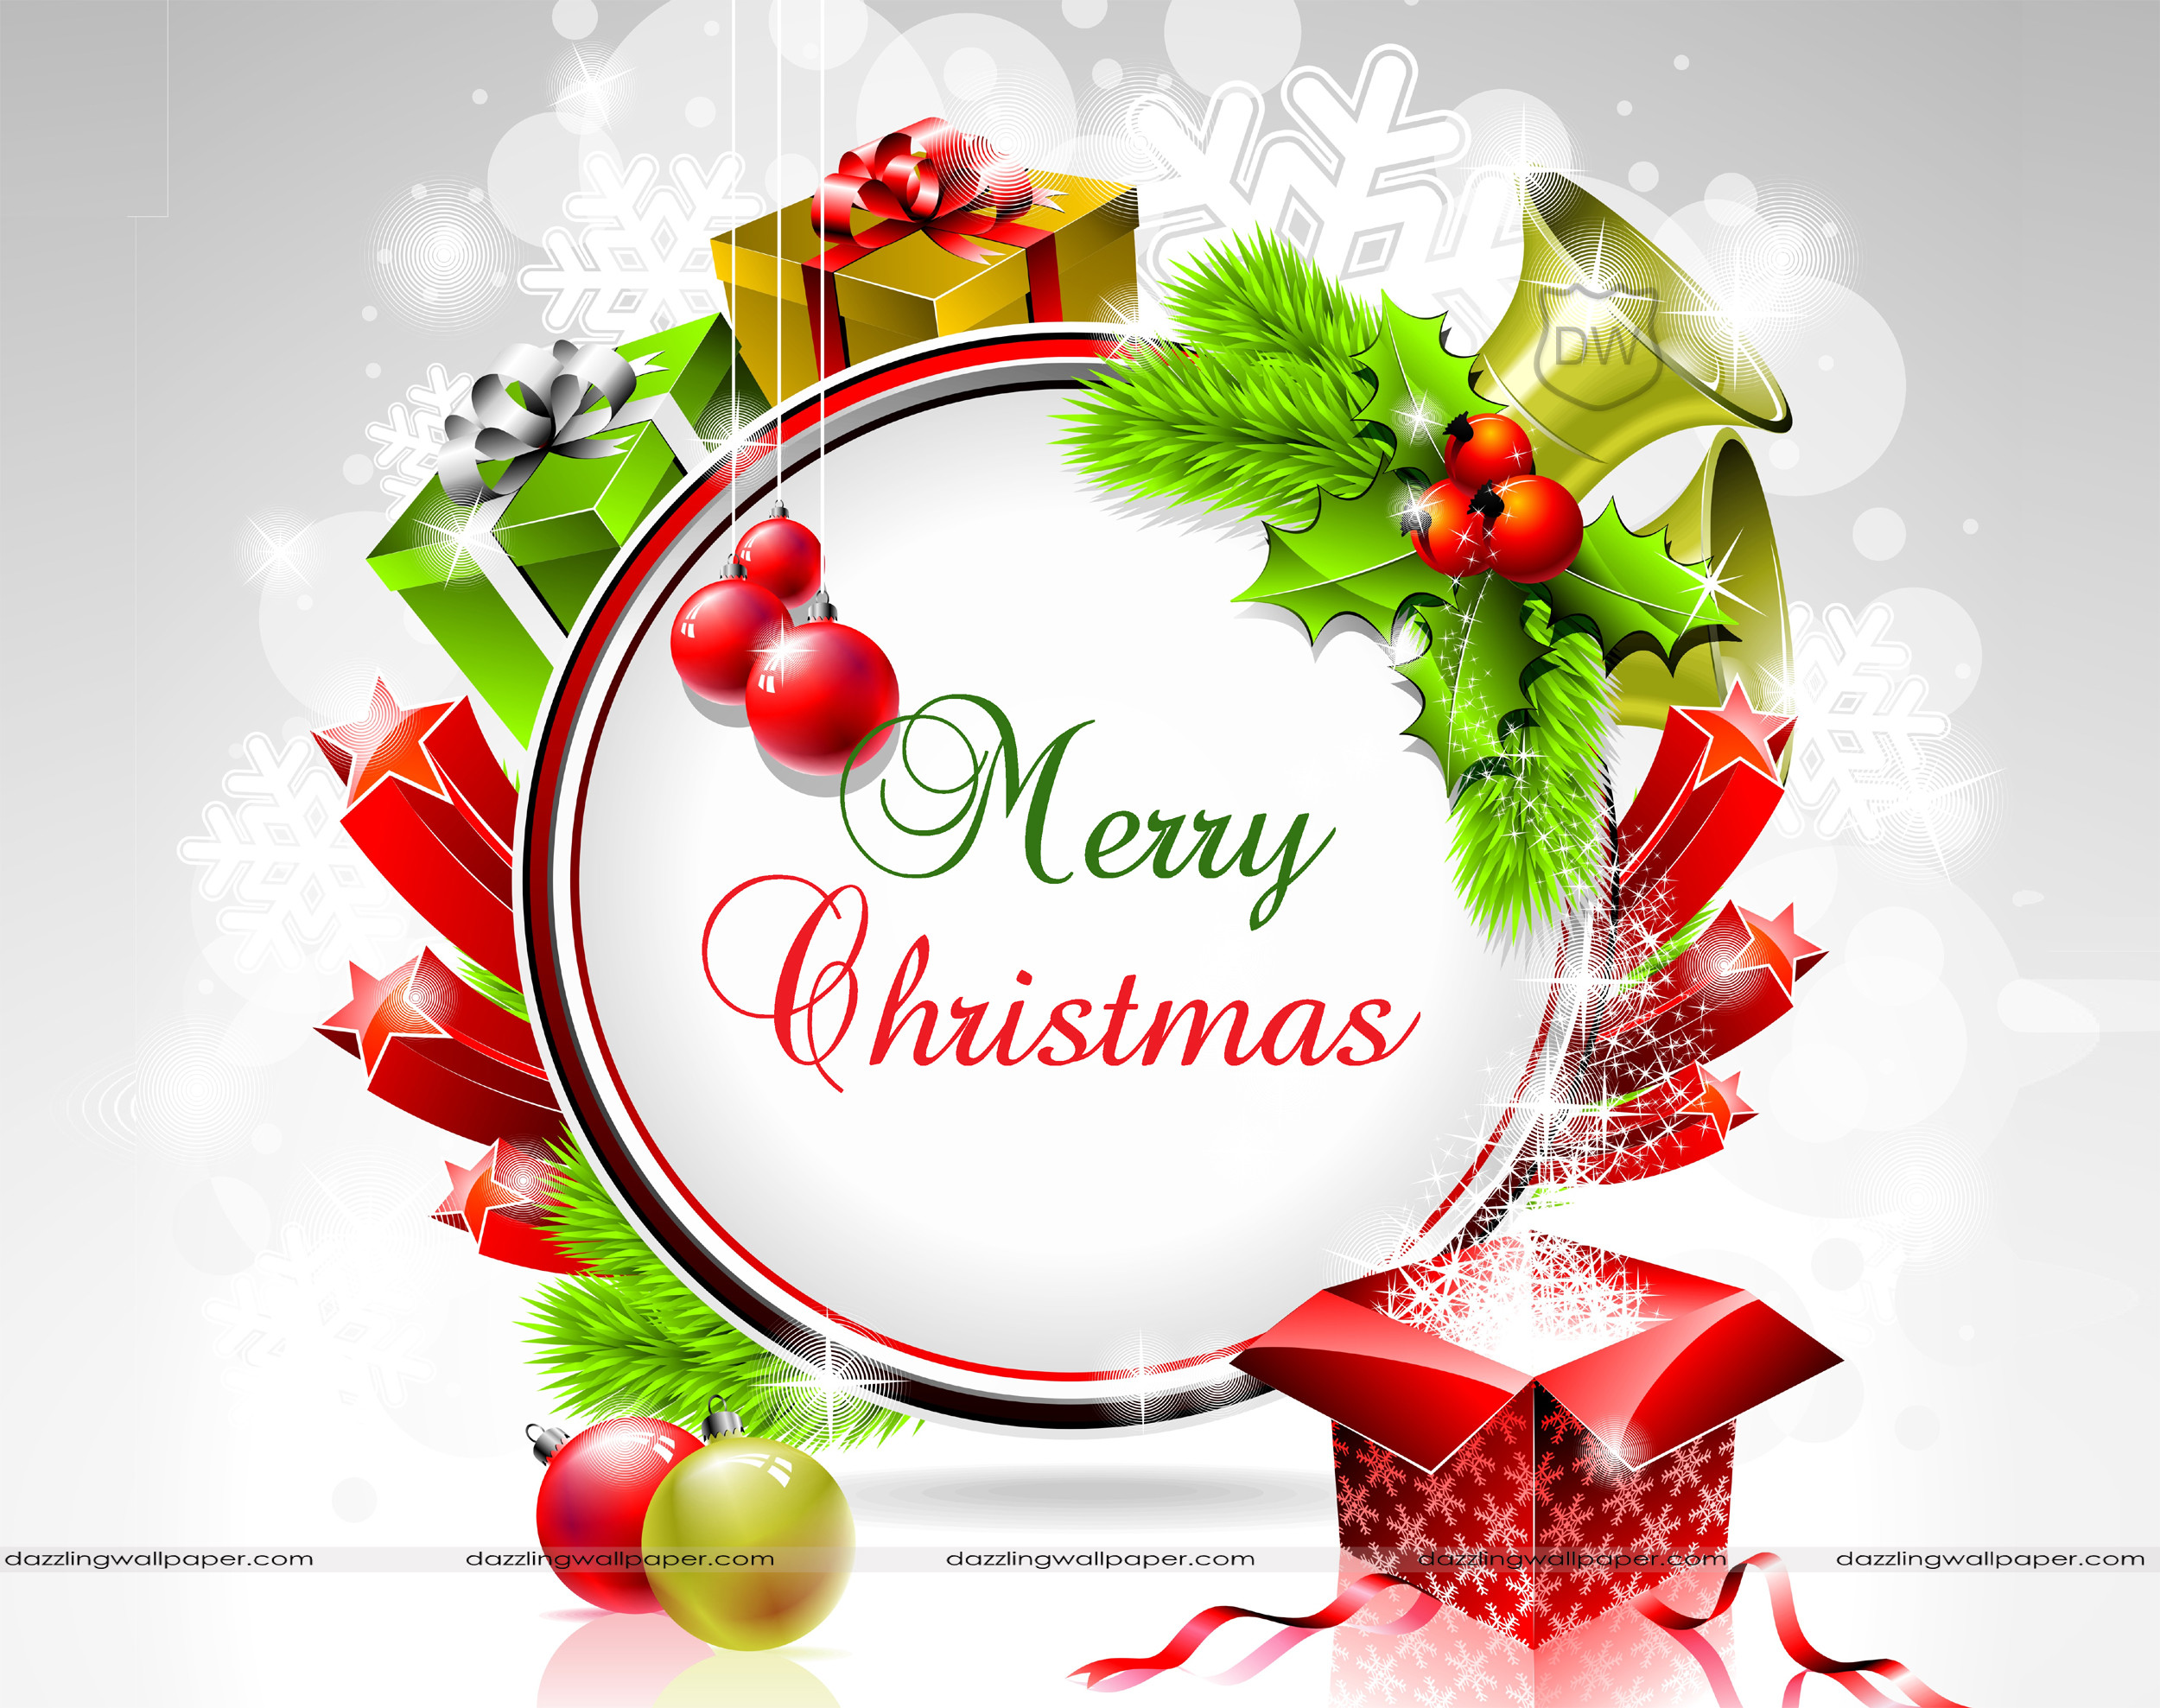 merry christmas 3d wallpaper,text,holly,greeting,font,illustration